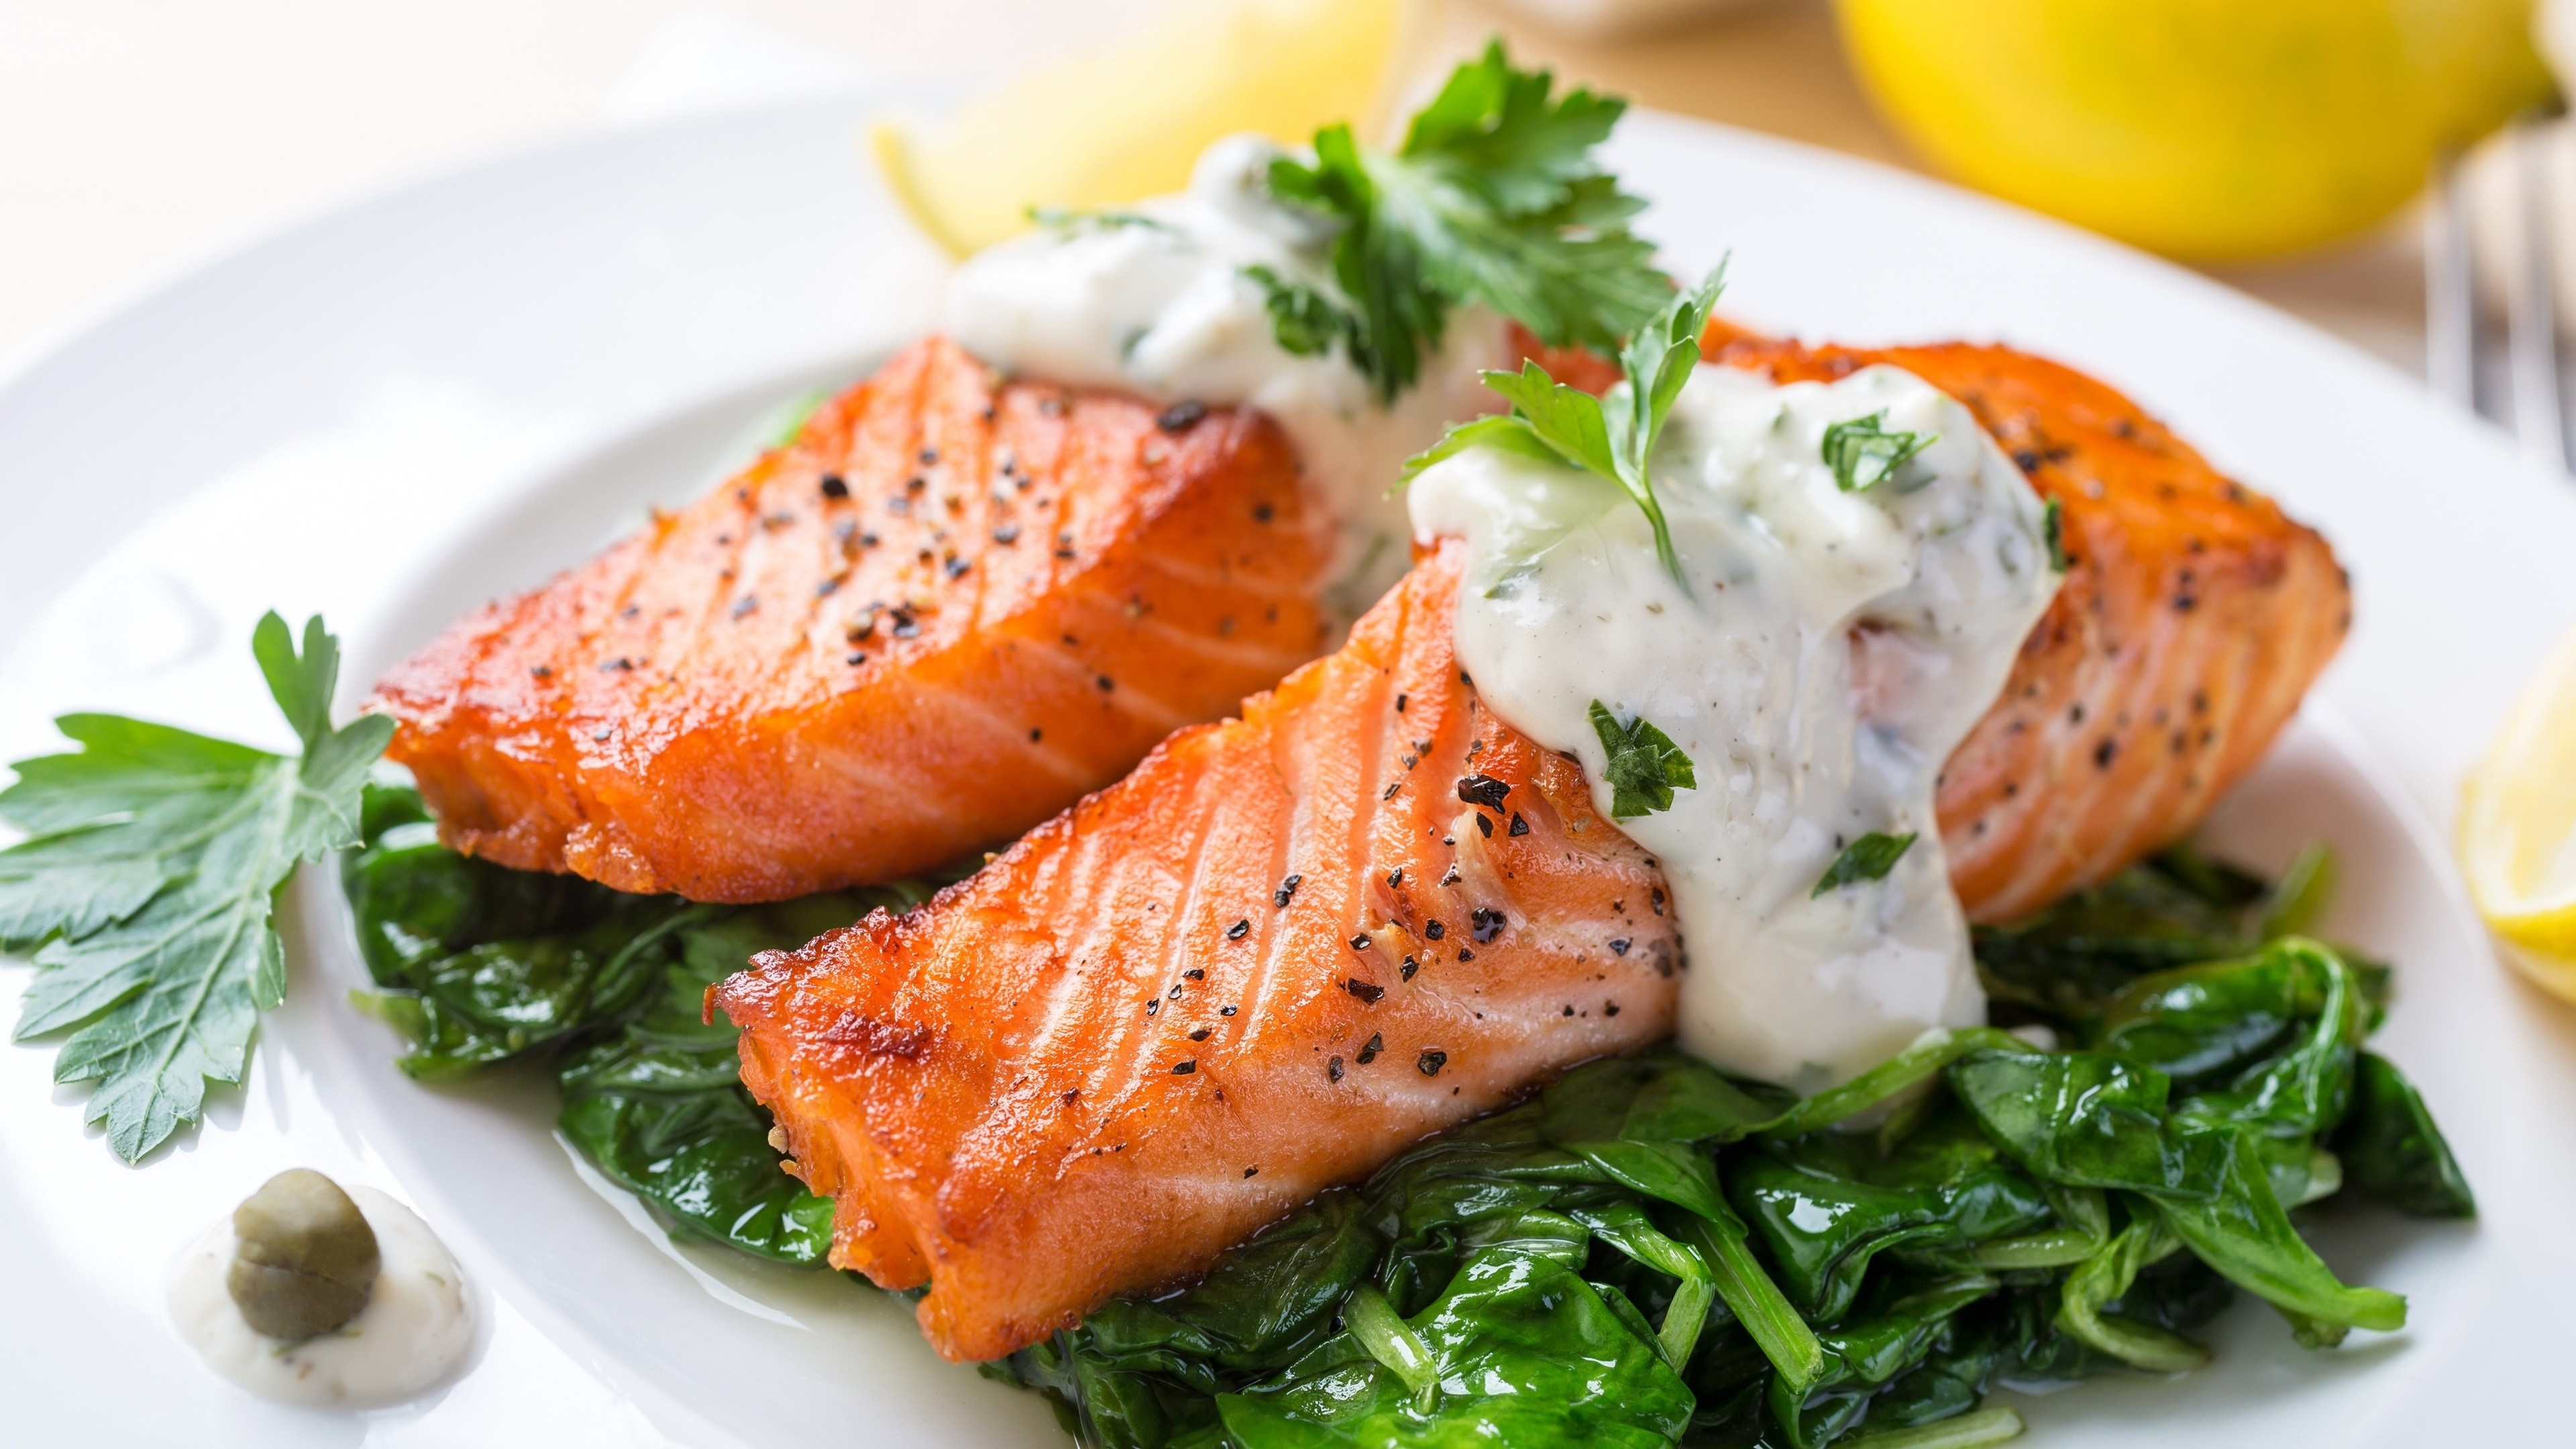 Grilled salmon, Healthy meal, Fresh produce, Flavourful dish, 3840x2160 4K Desktop